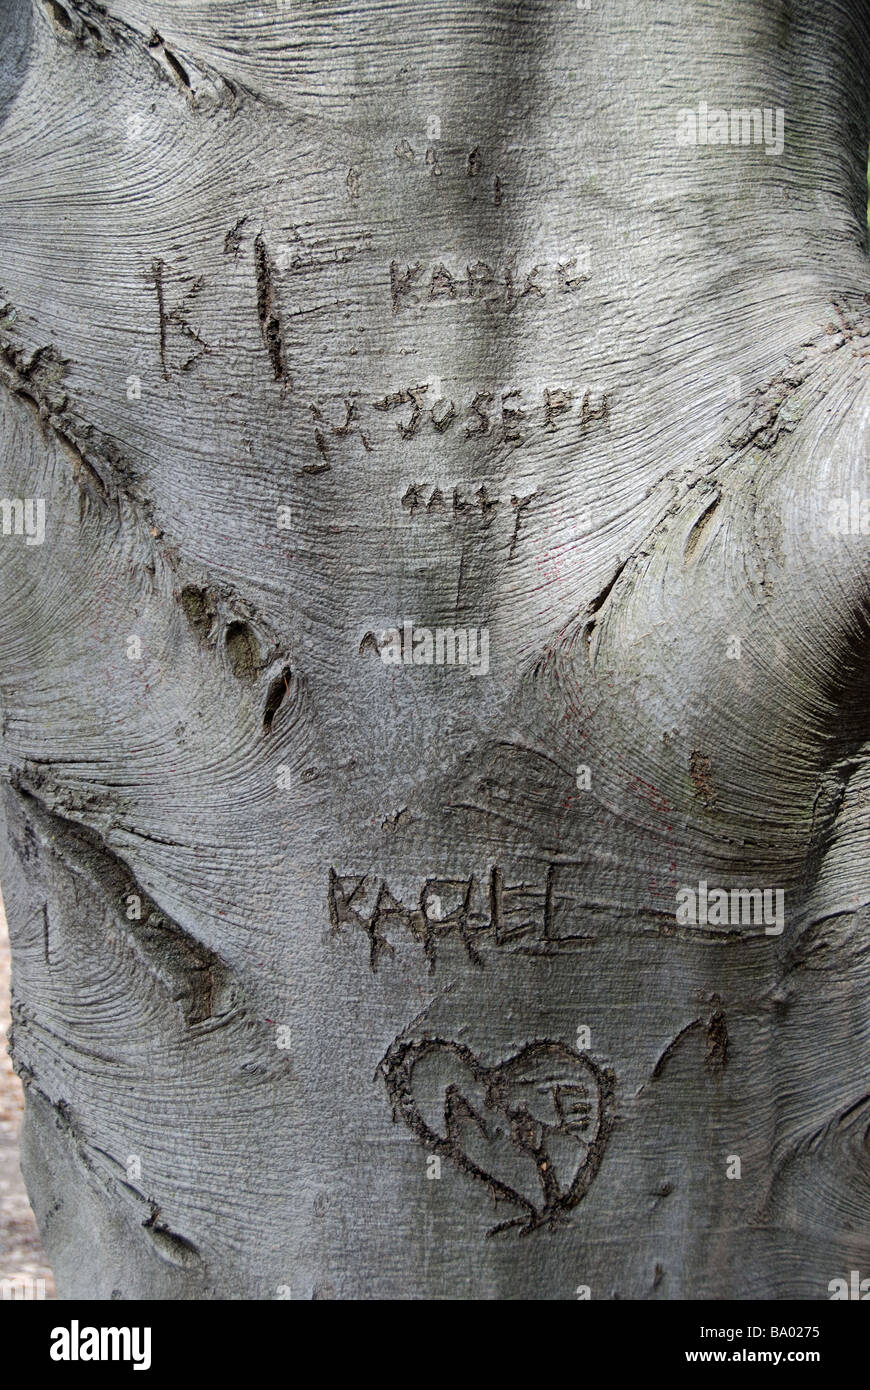 Names and initials etched into the smooth bark of a Beech Tree Stock Photo